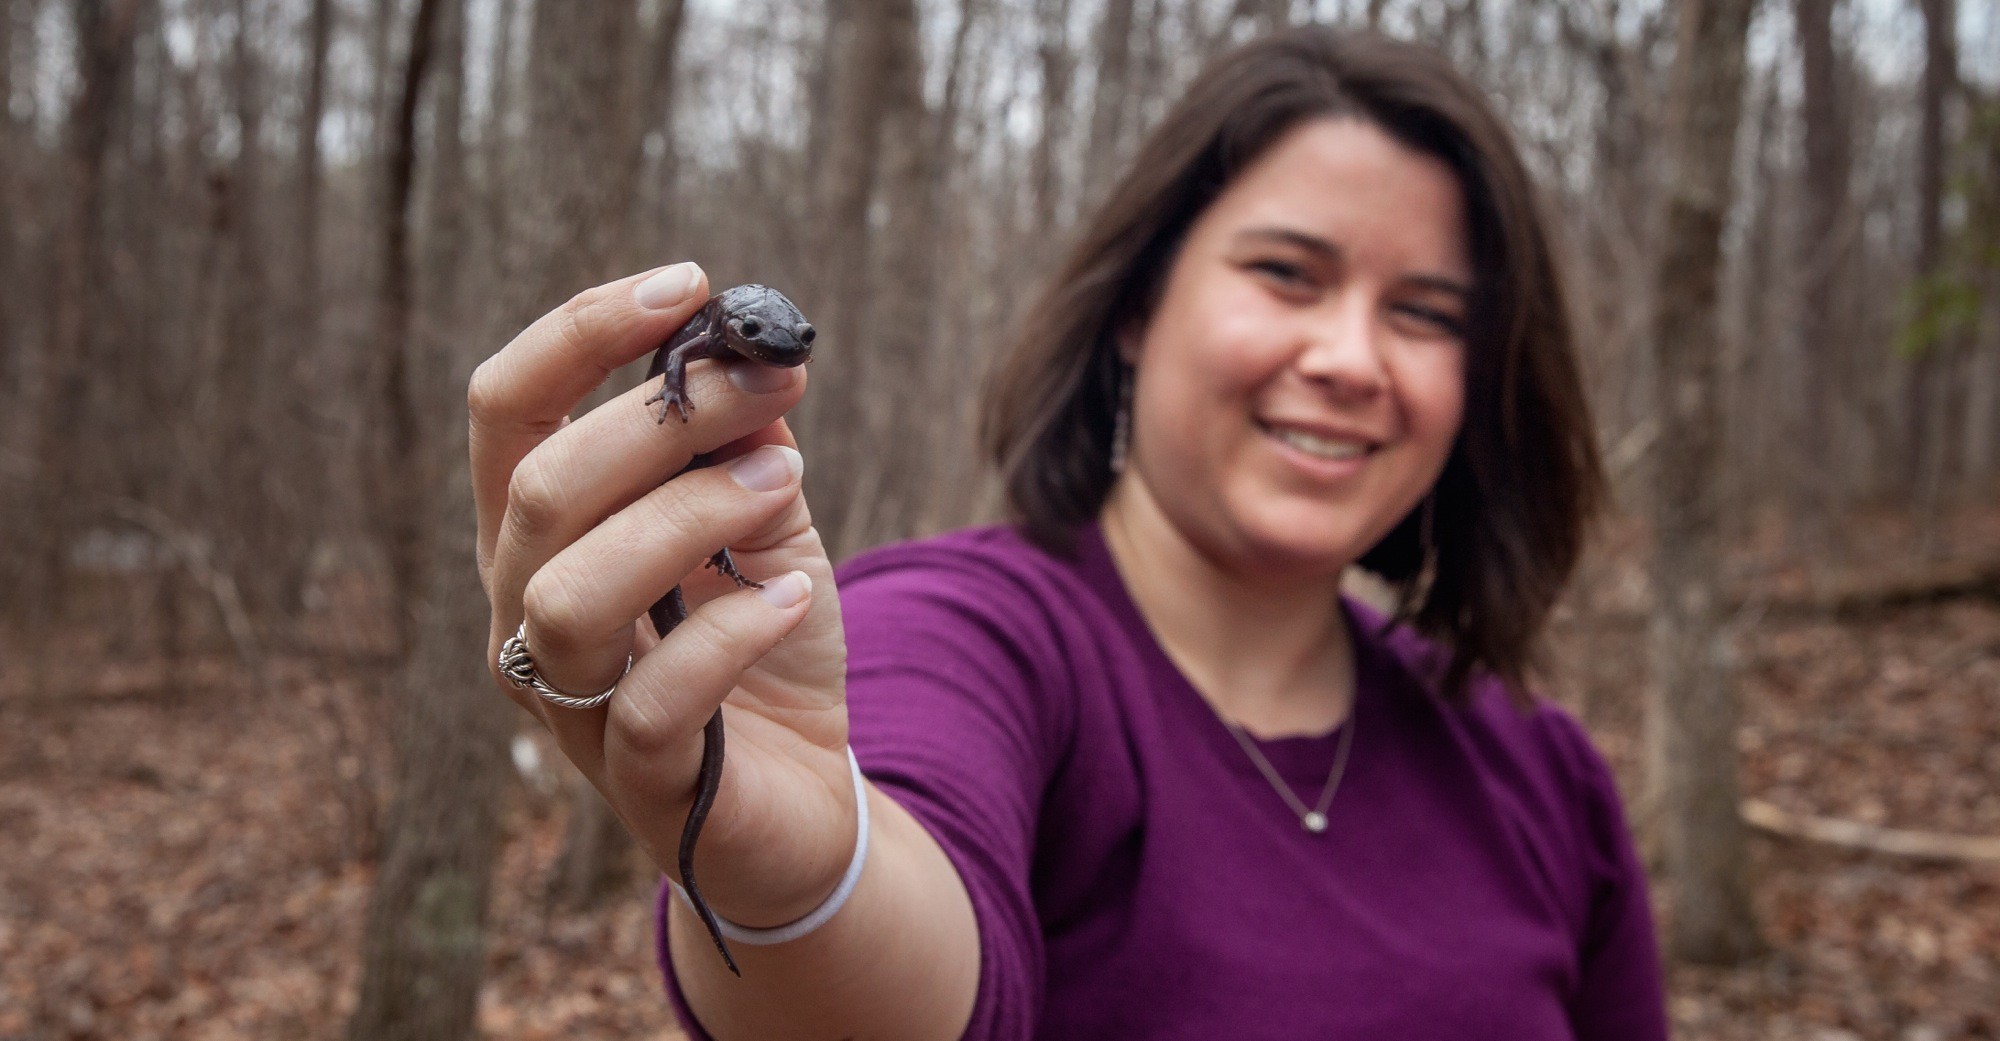 Kristen Cecala and one of her research subjects: a spotted salamander.